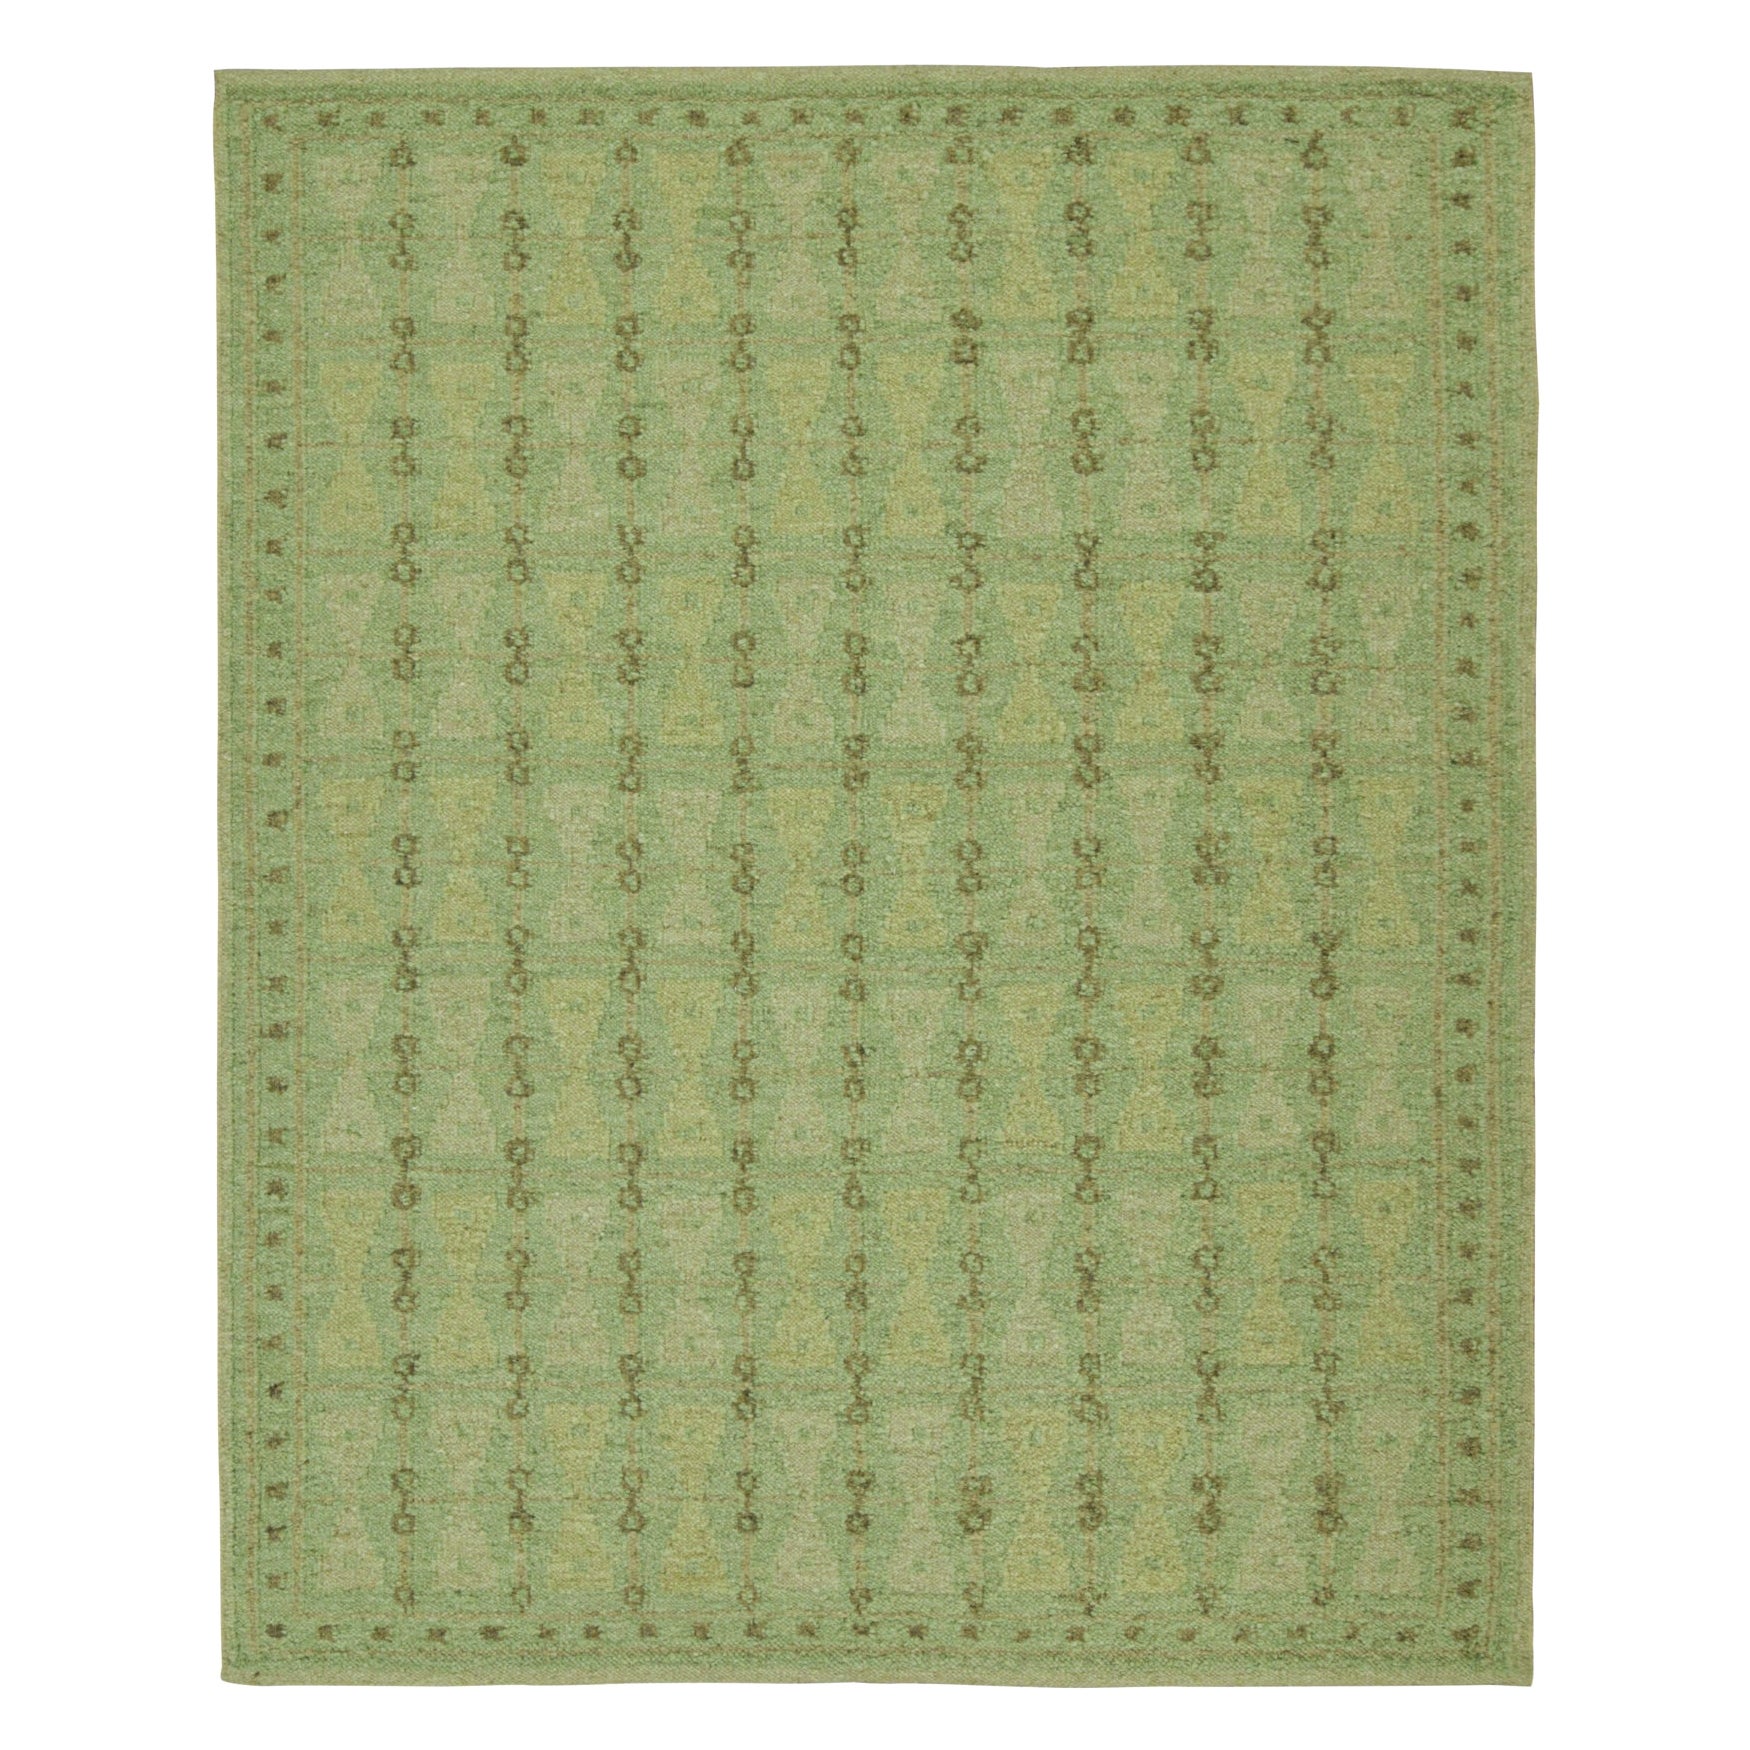 Rug & Kilim’s Scandinavian Style Kilim with Geometric Patterns in Tones of Green For Sale